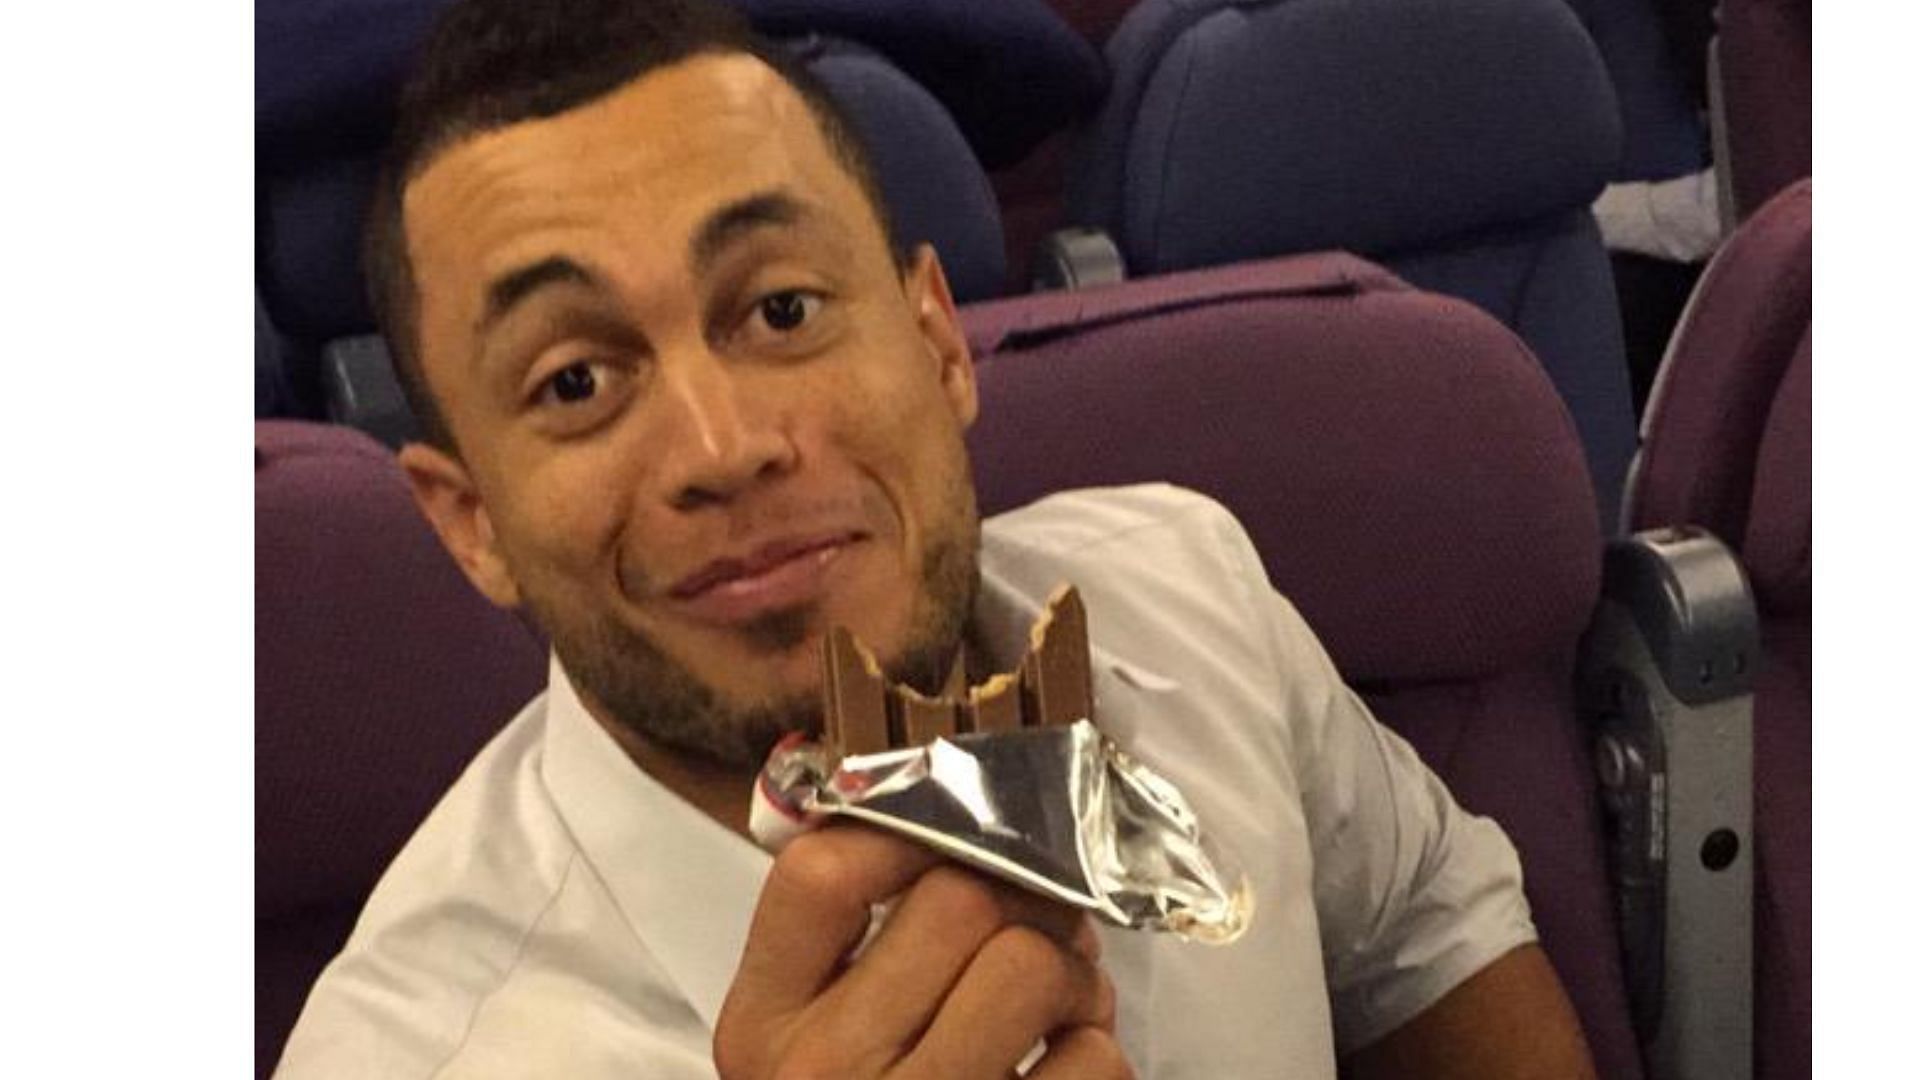 New York Yankees Giancarlo Stanton eating a kit kat bar during an interview with Jimmy Fallon.